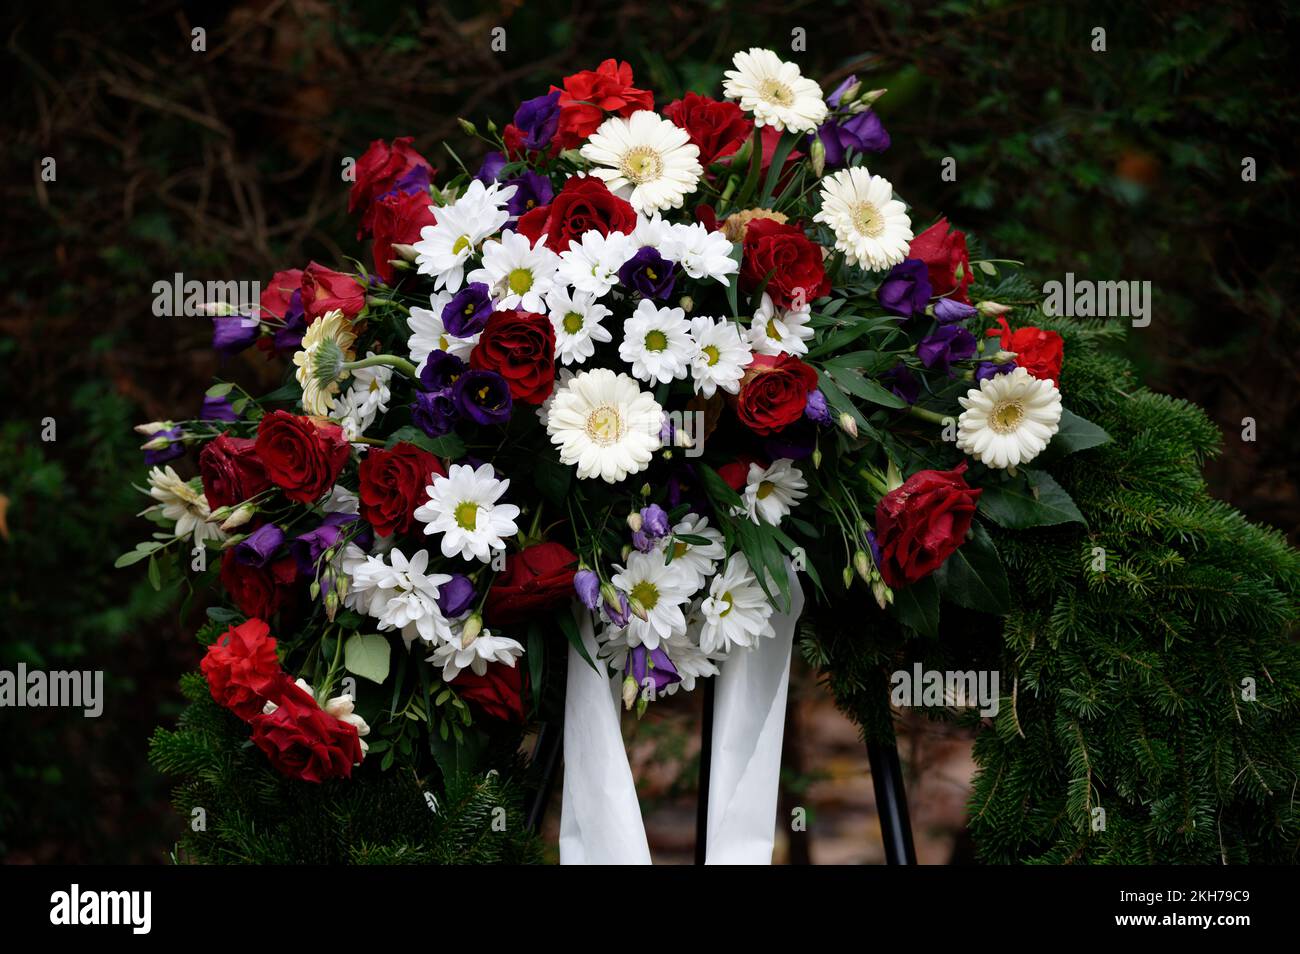 funeral wreath in a cemetery with colorful flowers and bow on a metal stand Stock Photo